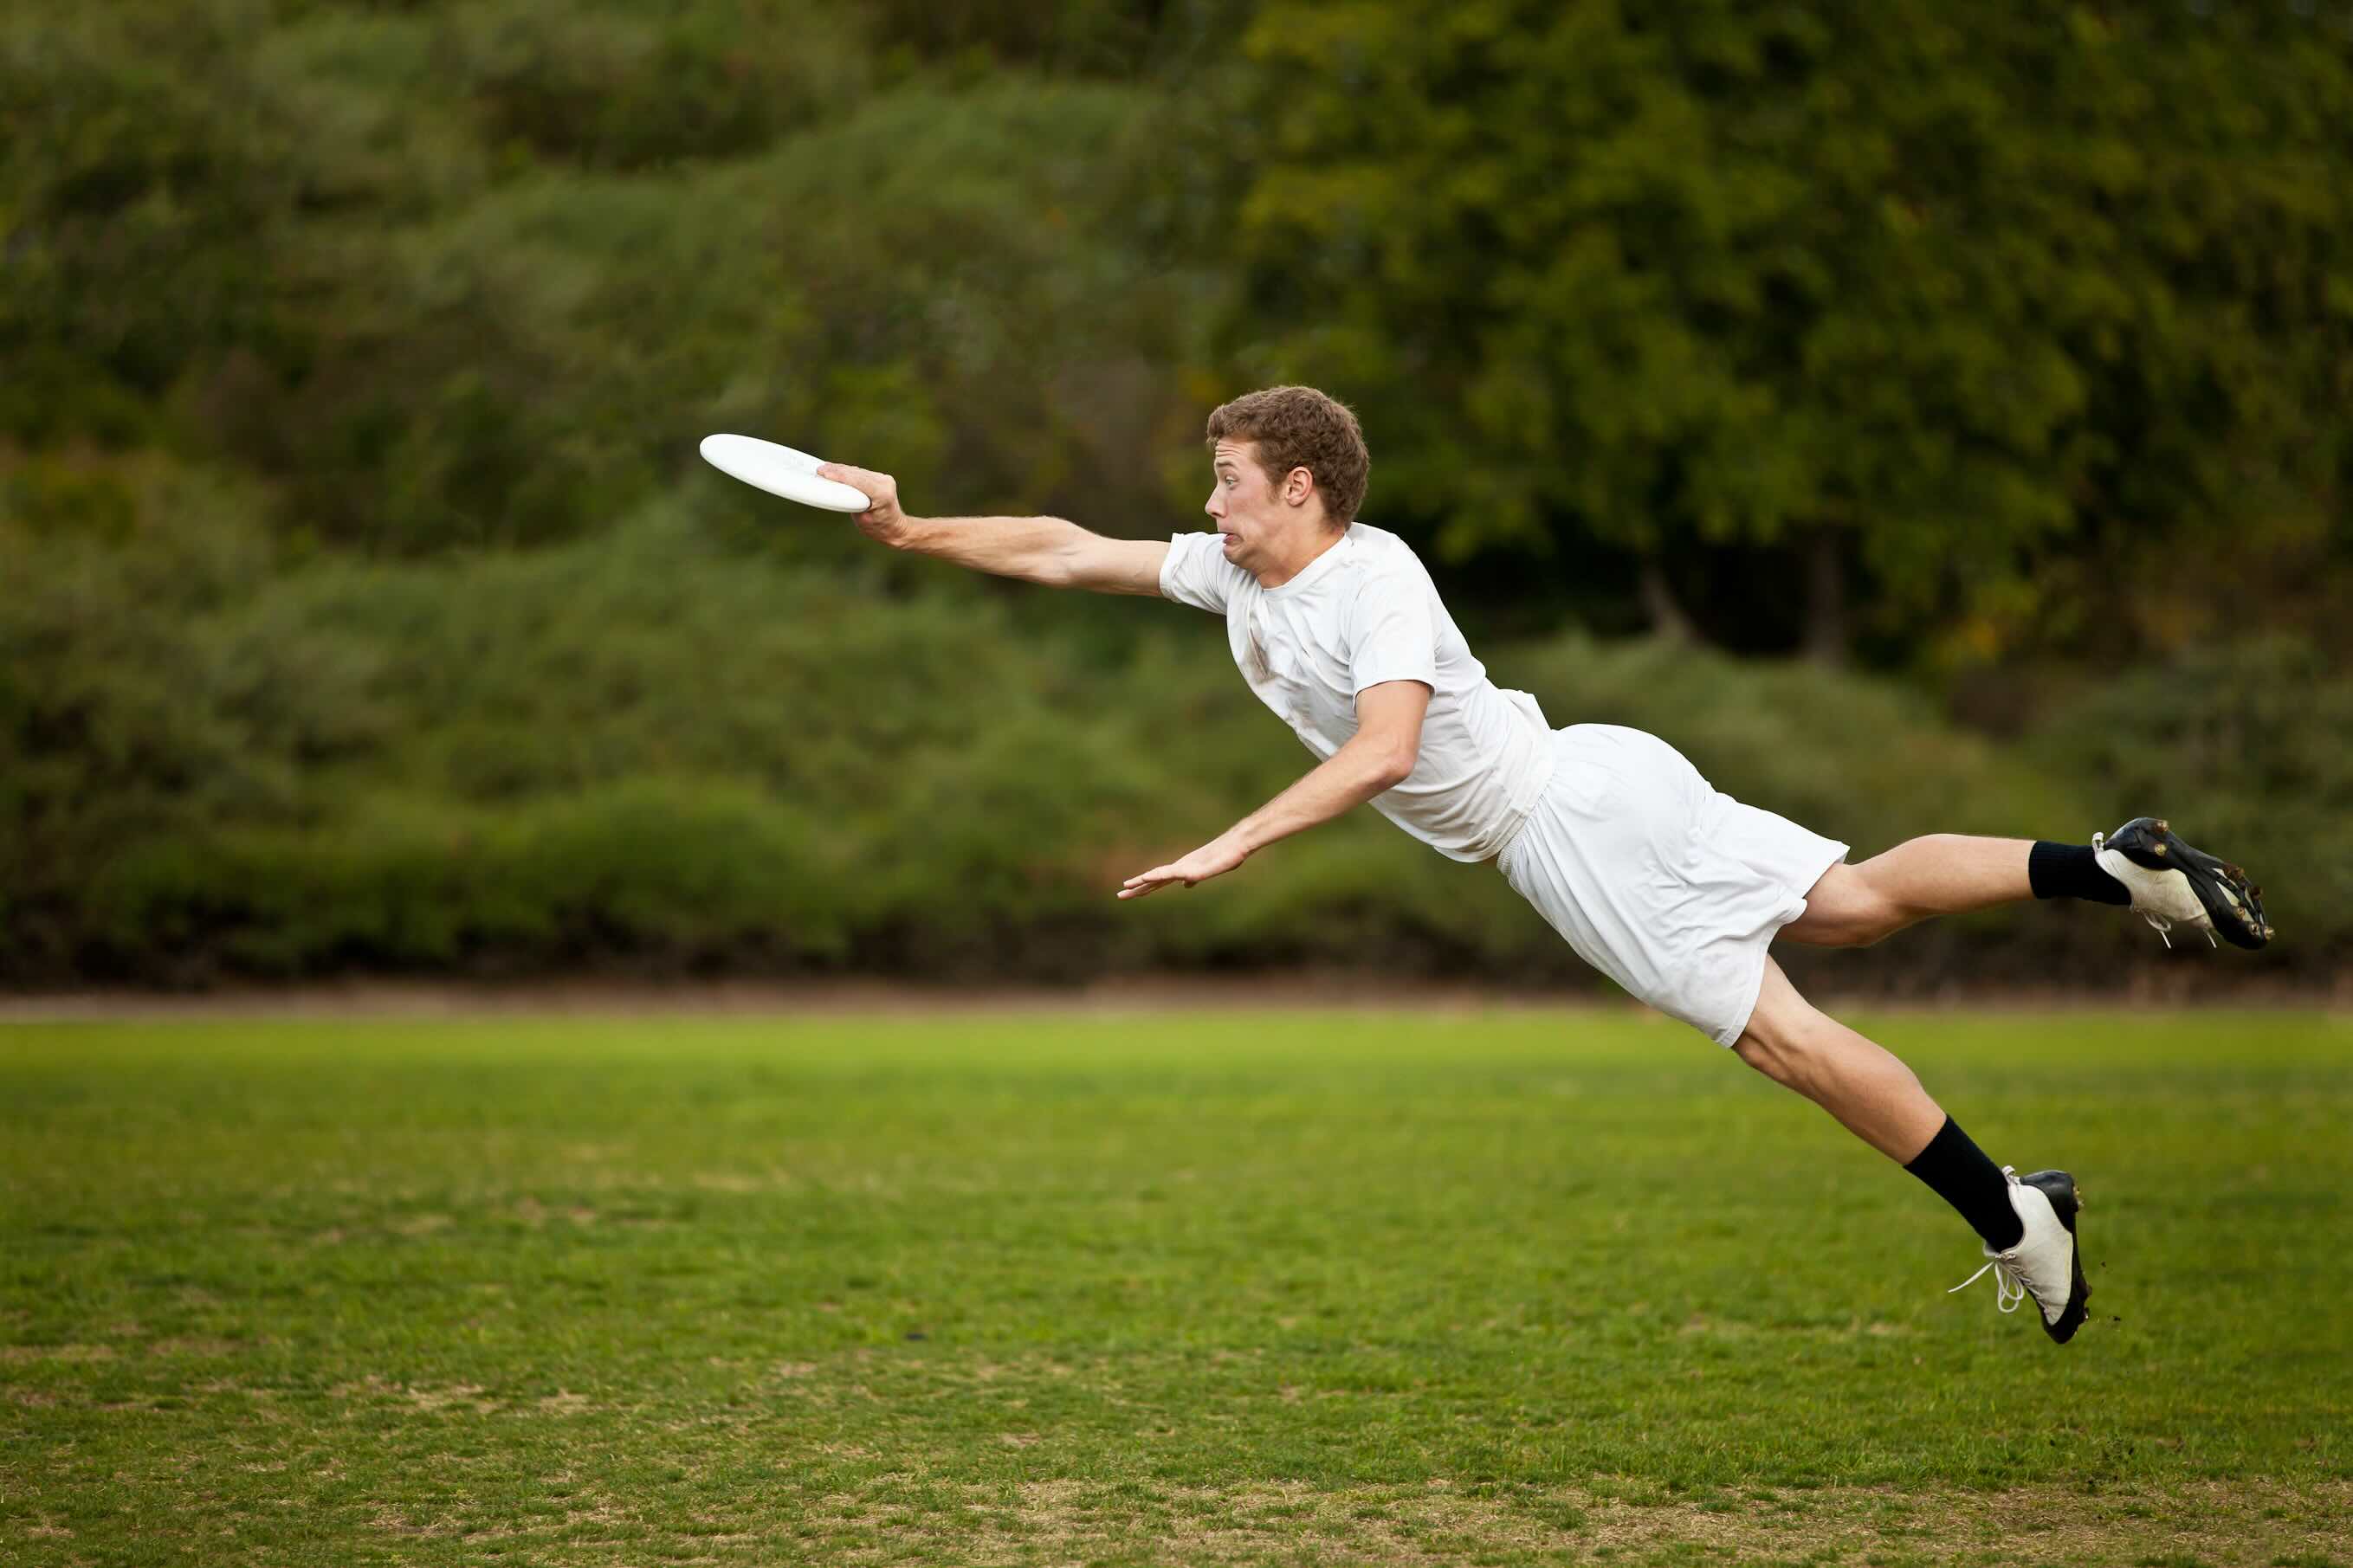 How Do You Score Points In Ultimate Frisbee?